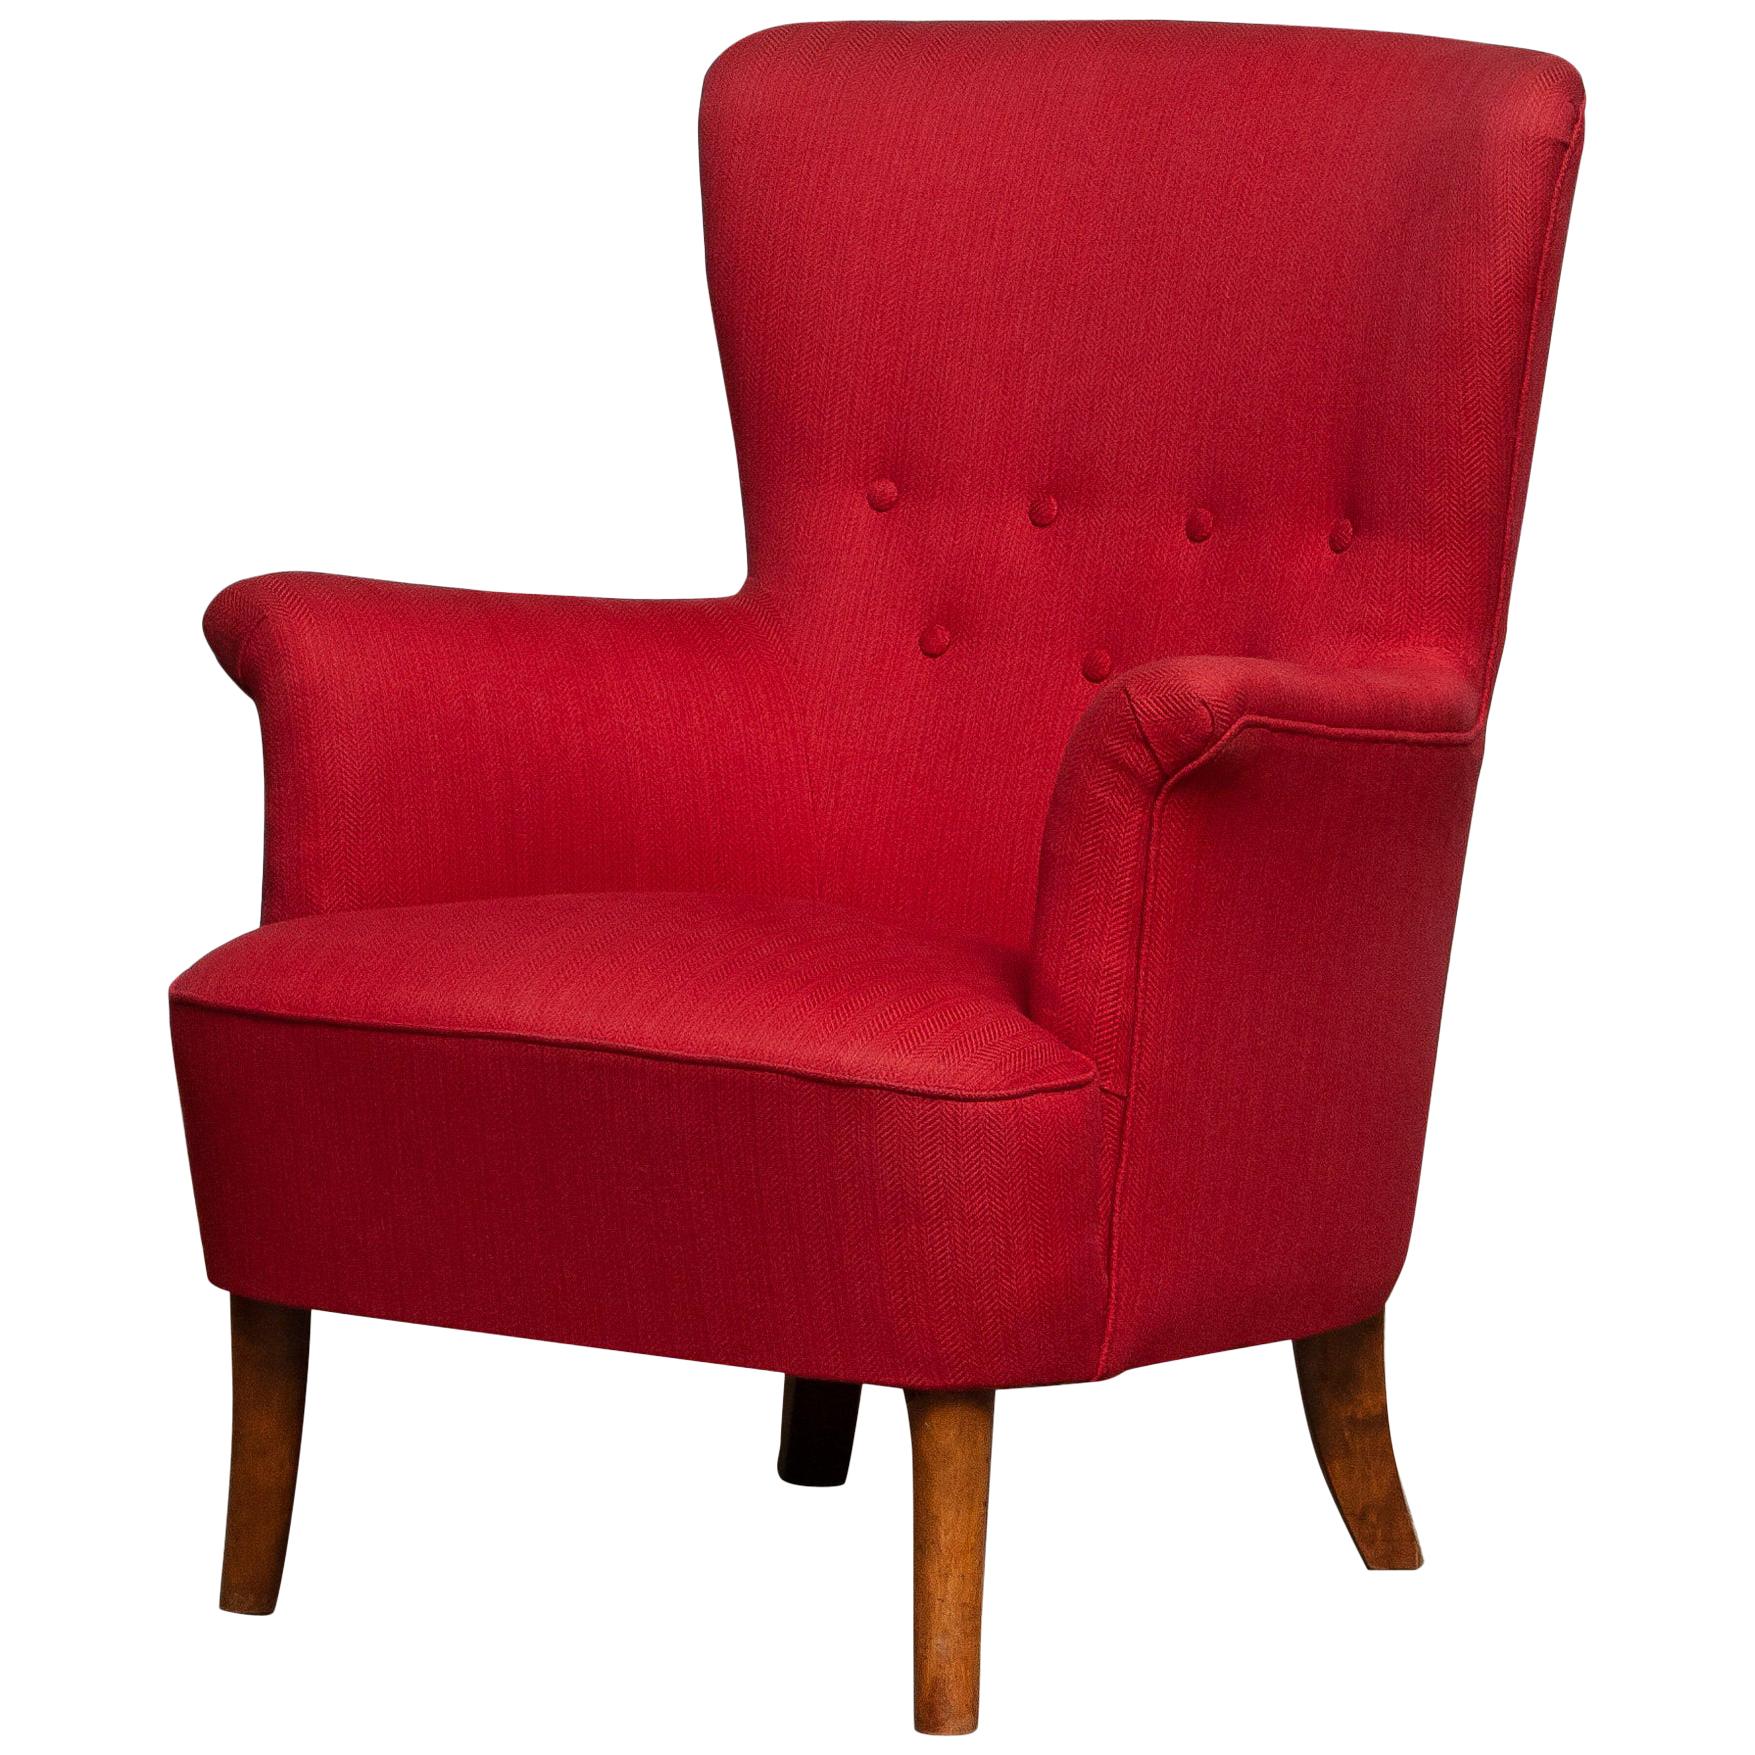 Beautiful fuchsia or red easy or lounge chair designed by Carl Malmsten for OH Sjogren, Sweden.
The overall condition is good
Period: 1940-1949.
  